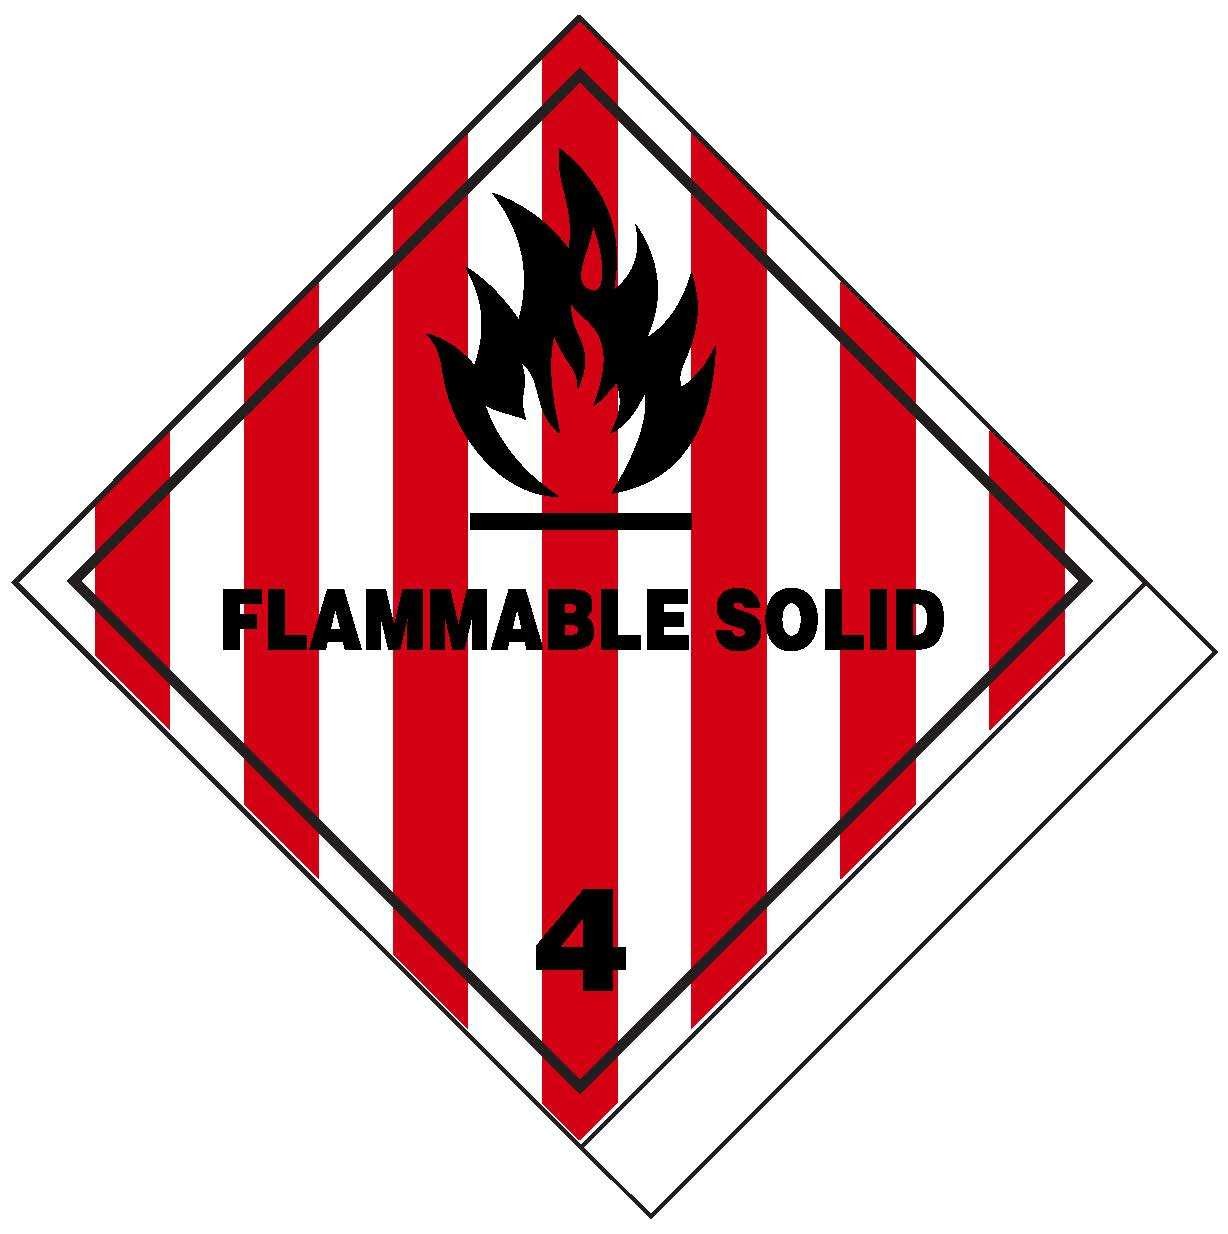 Flammable Solid Class 4